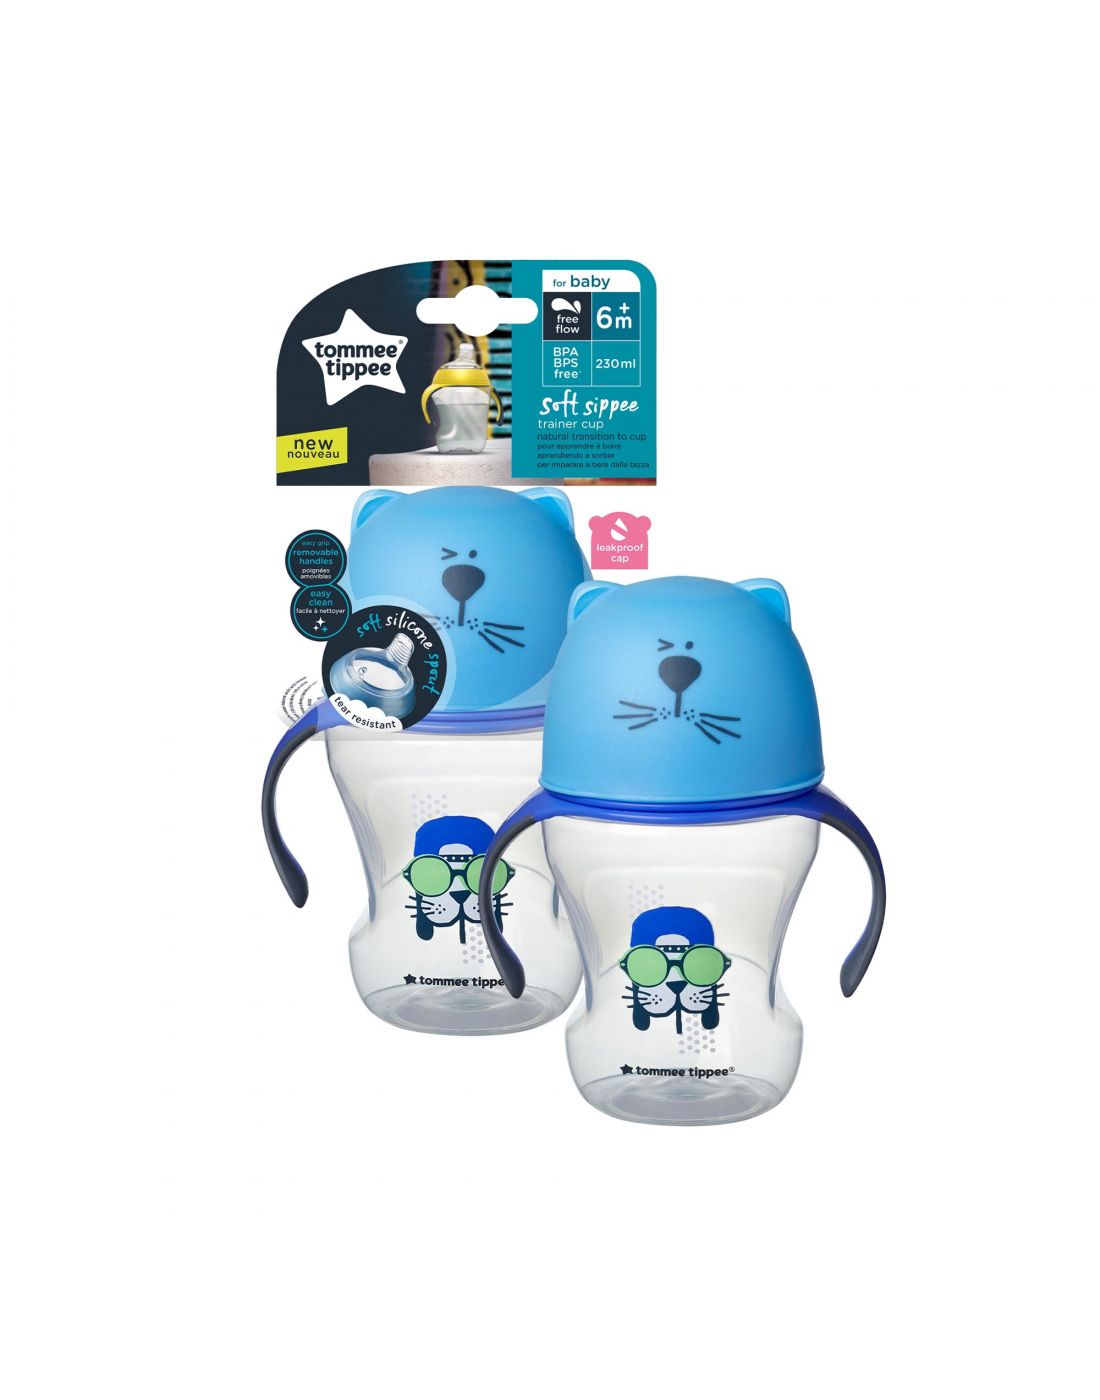 Tommee Tippee Kids Training Cup with Soft Sippee and Handles Blue 230ml 6m+